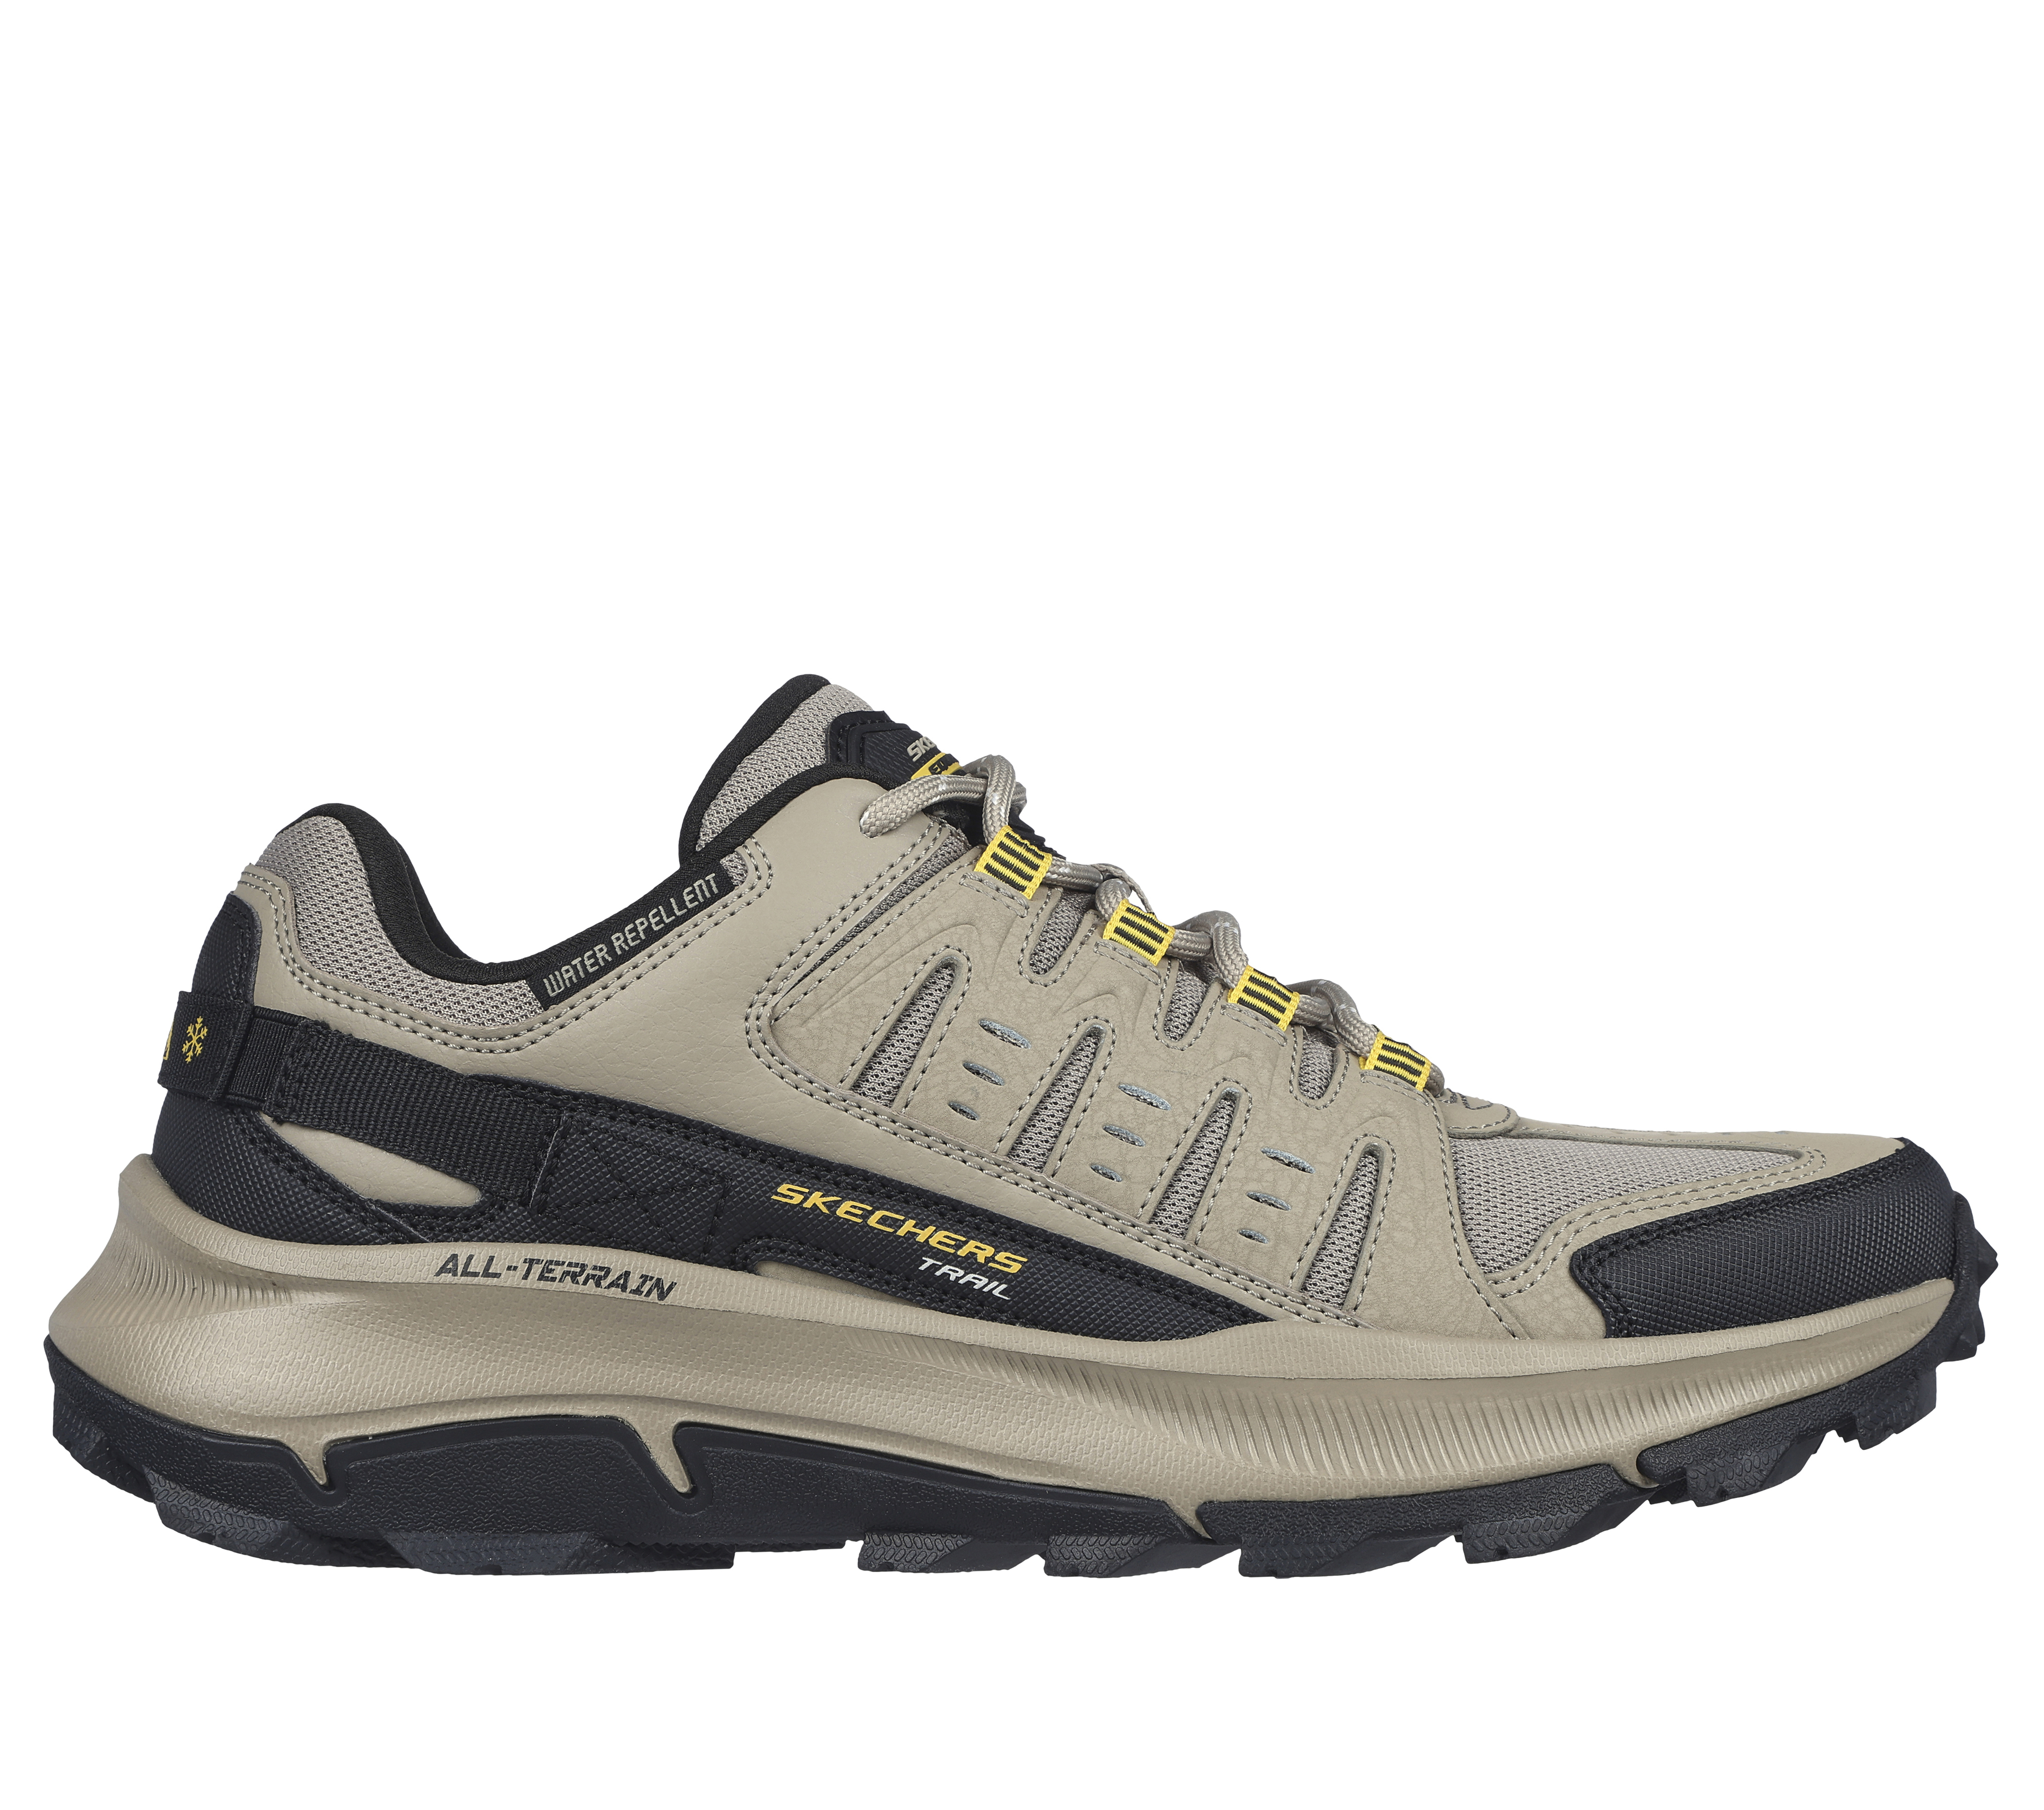 Engañoso sistema Mus Relaxed Fit: Equalizer 5.0 Trail - Solix | SKECHERS